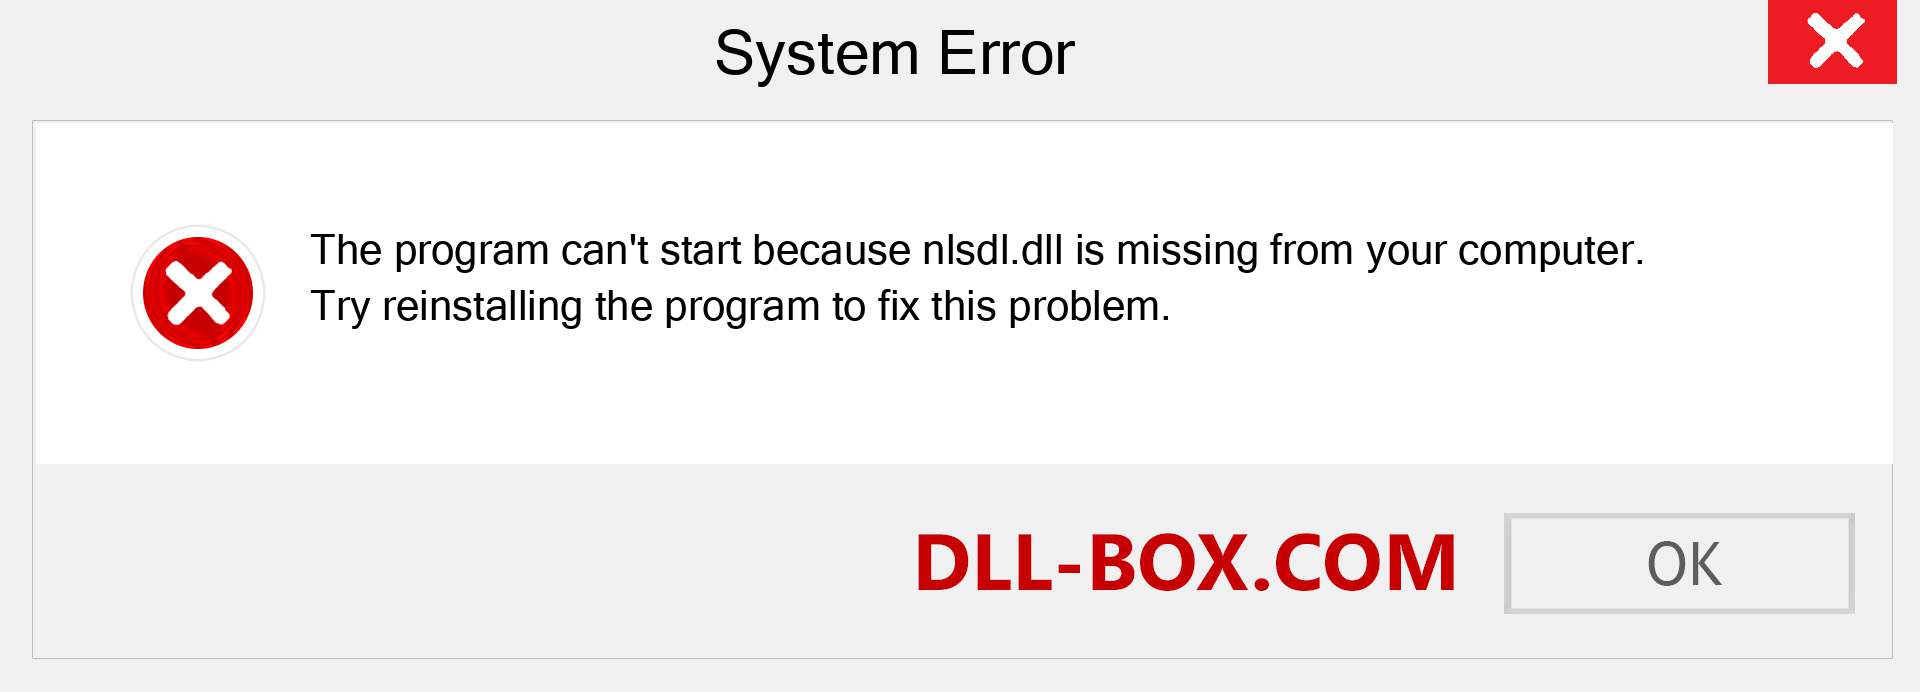  nlsdl.dll file is missing?. Download for Windows 7, 8, 10 - Fix  nlsdl dll Missing Error on Windows, photos, images